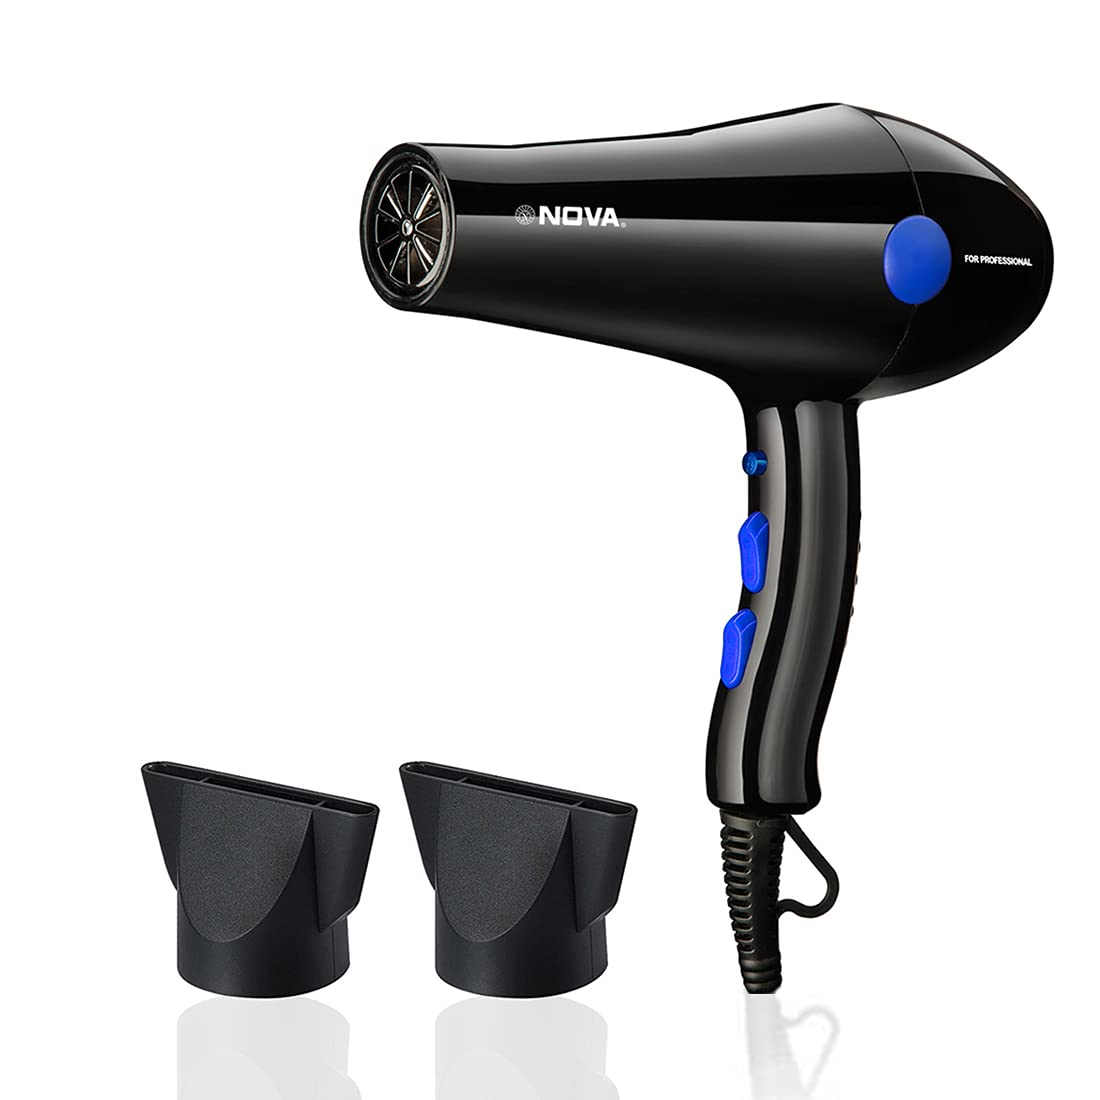 Amazon Festival Sale: Buy items like daily use hair trimmer, hair dryer and shaving trimmer in the sale, price starts from just Rs 500